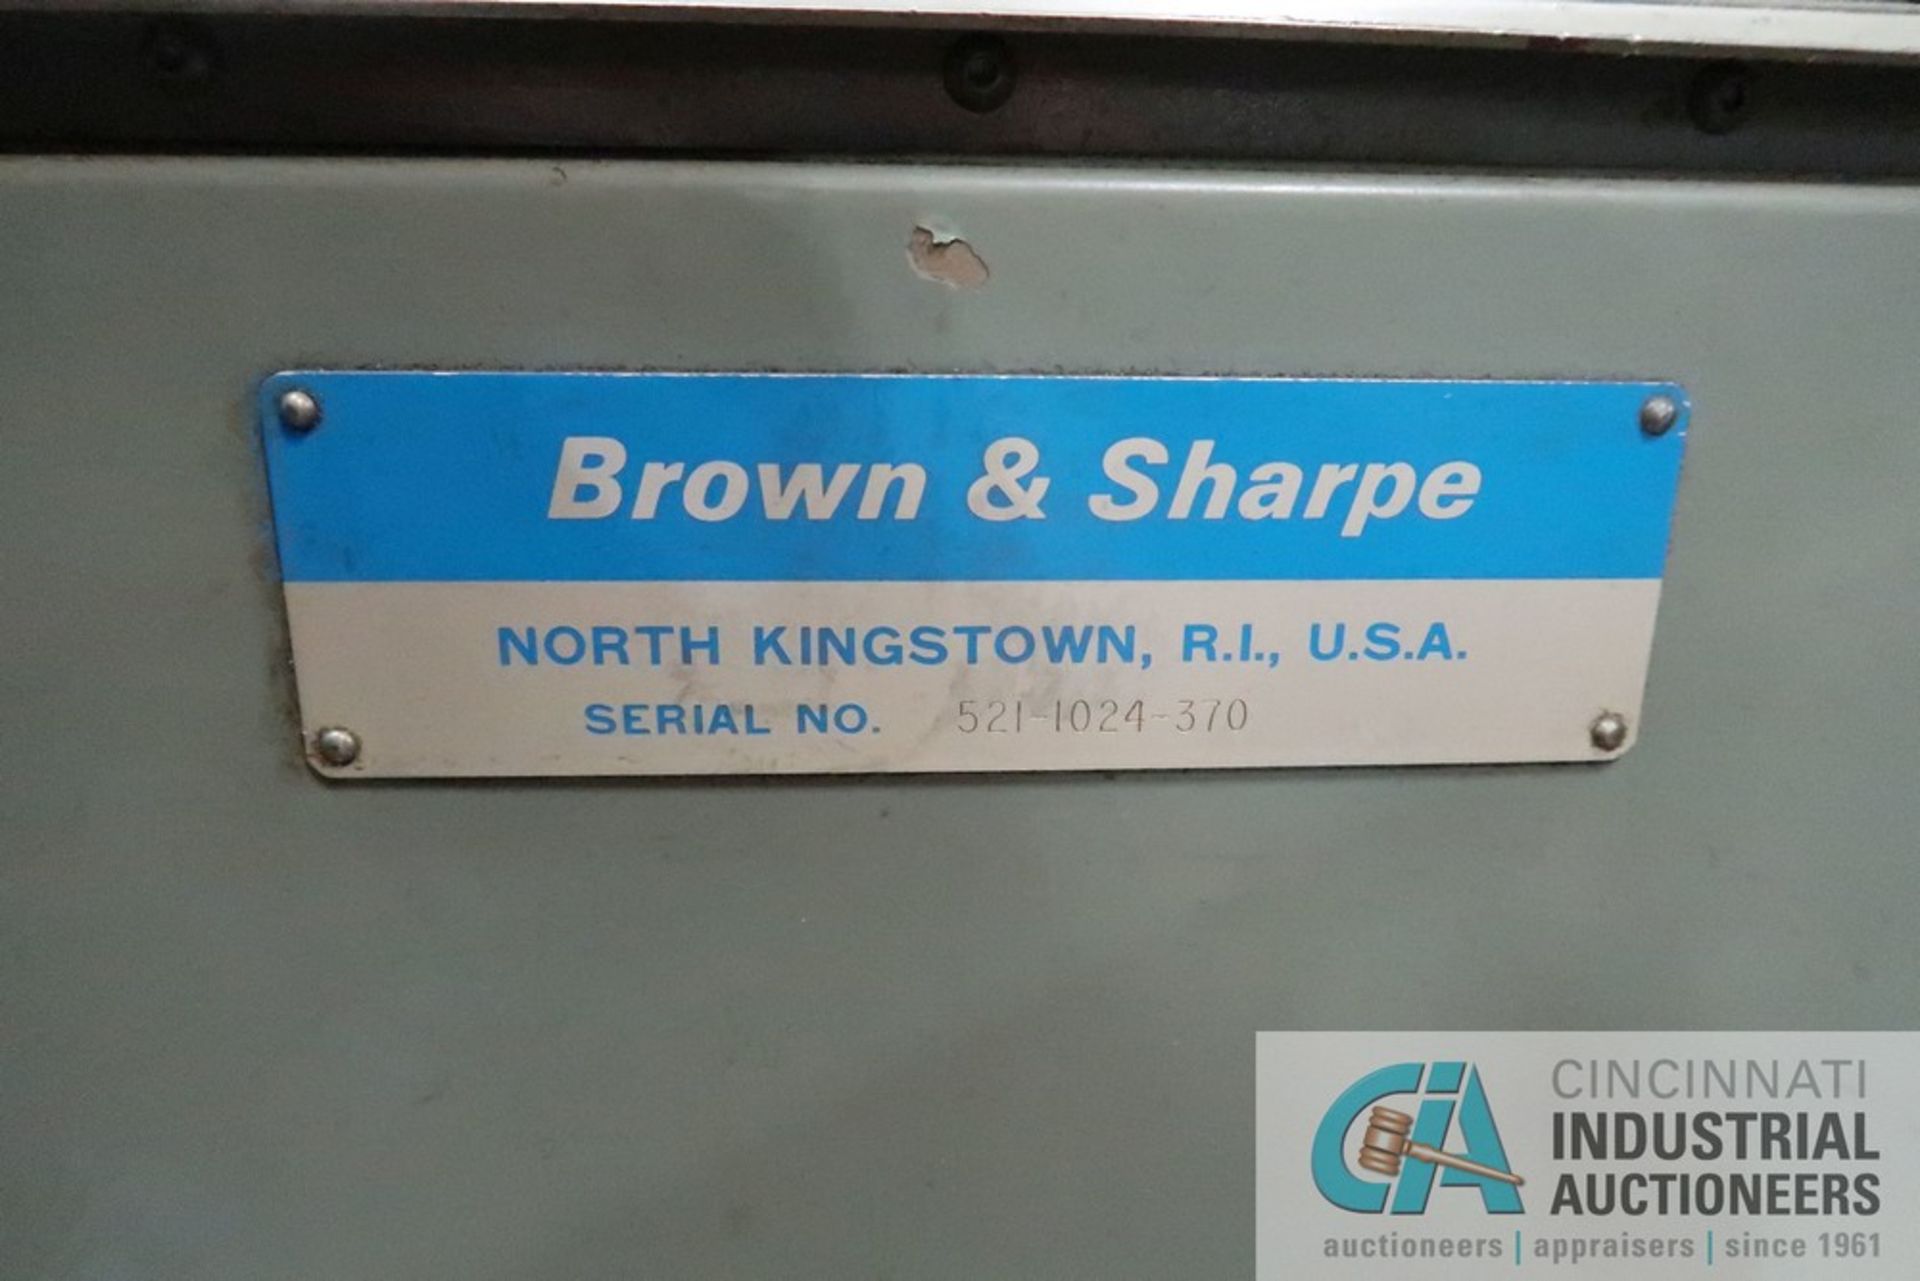 BROWN AND SHARPE MODEL 1024 UNIVERSAL GRINDER; S/N 521-1024-370, ACURITE III DRO, 60-600 RPM SPINDLE - Image 14 of 14